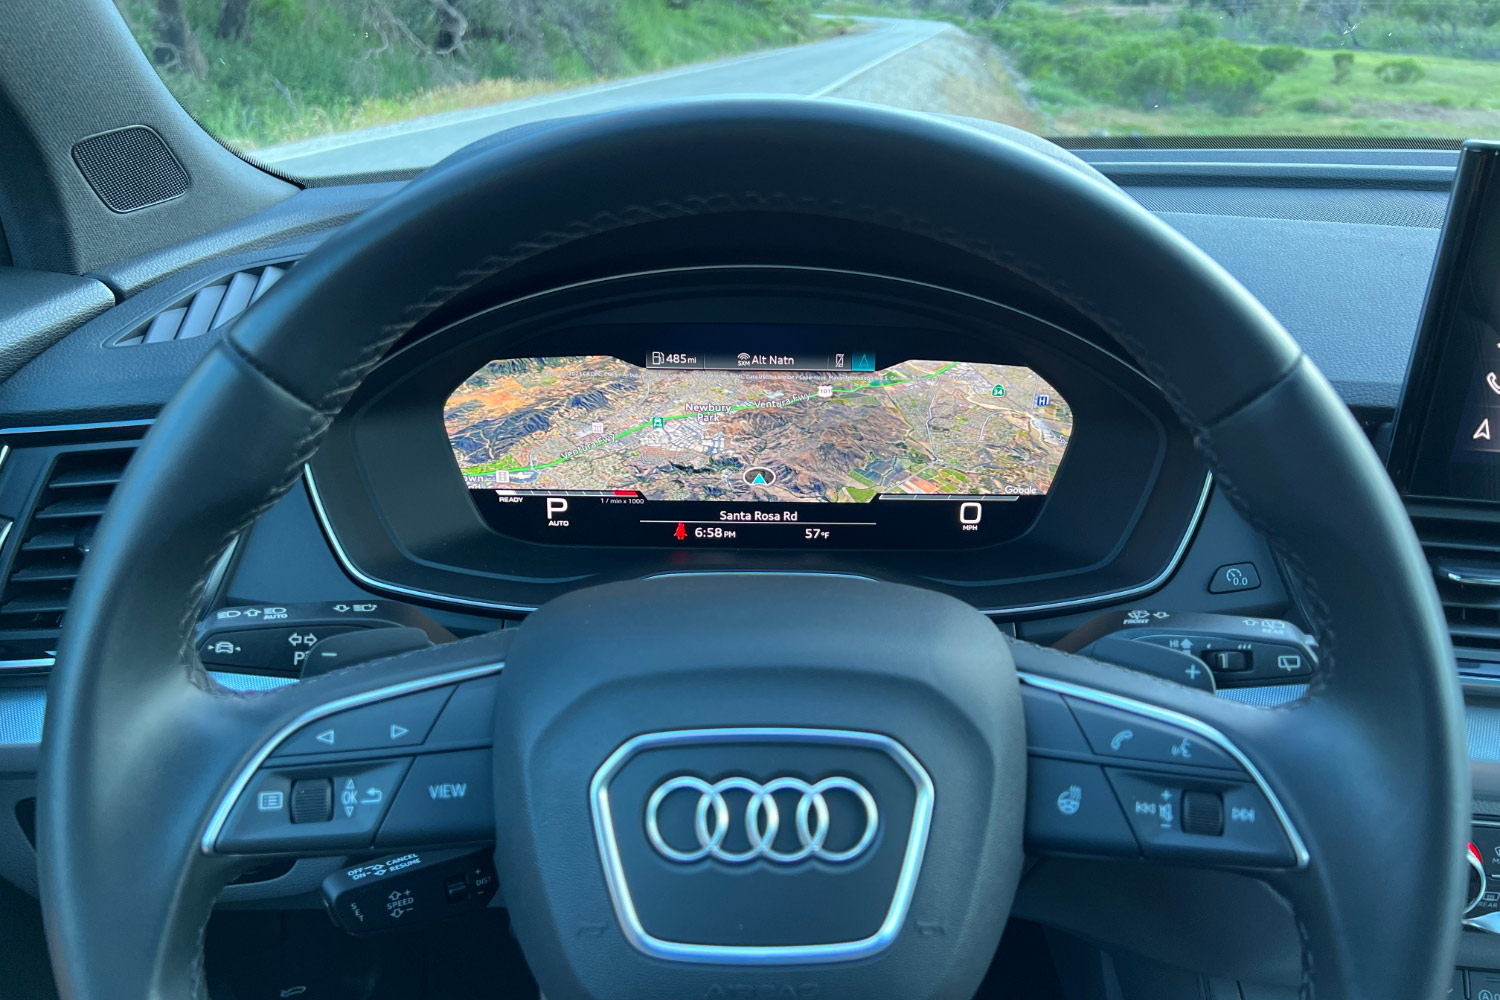 Steering wheel and driver information screen in an Audi Q5.